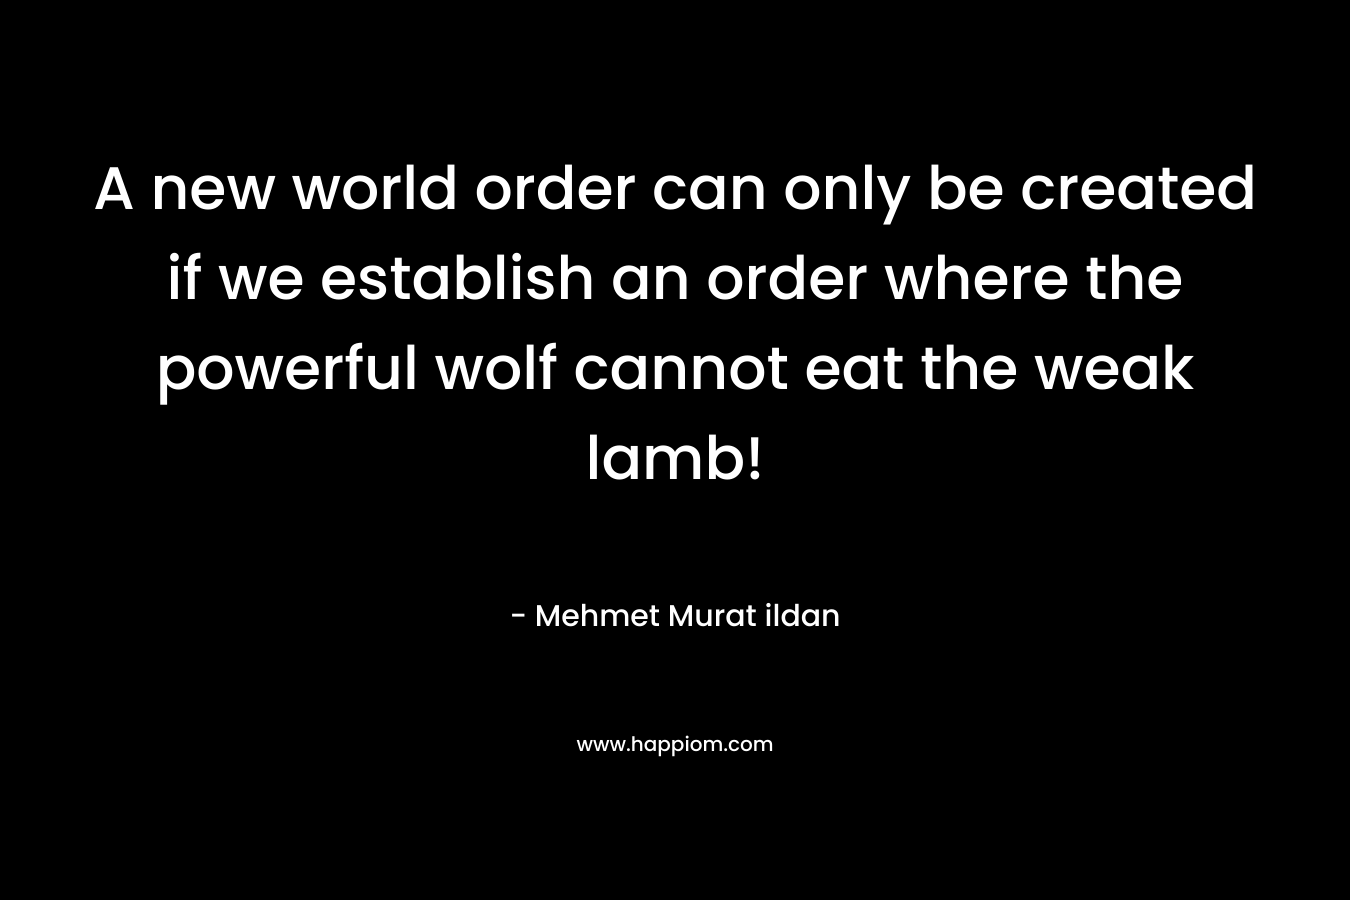 A new world order can only be created if we establish an order where the powerful wolf cannot eat the weak lamb! – Mehmet Murat ildan